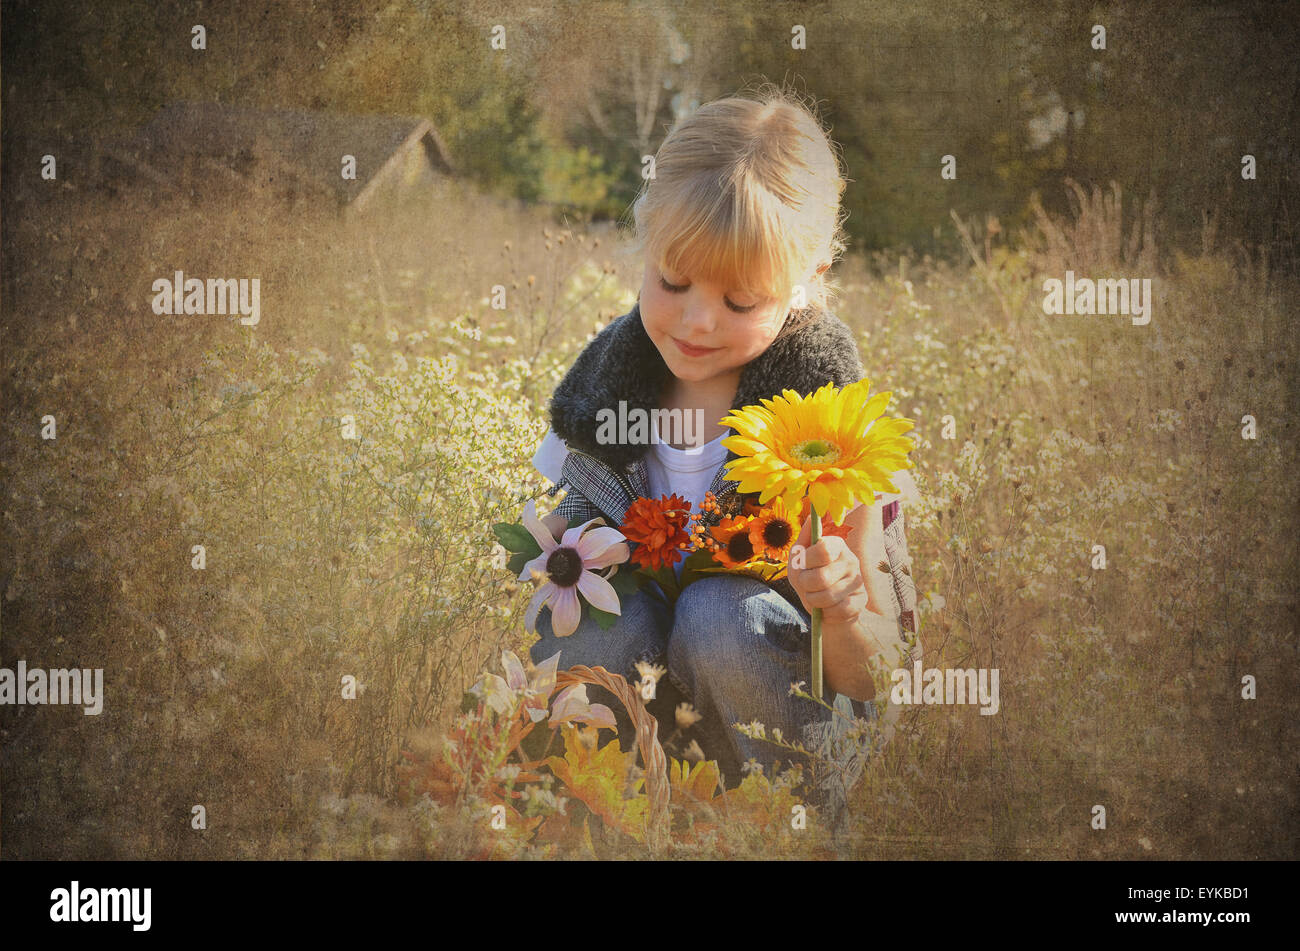 Little blond girl holding autumn flower bouquet in field with sepia vignette. Stock Photo